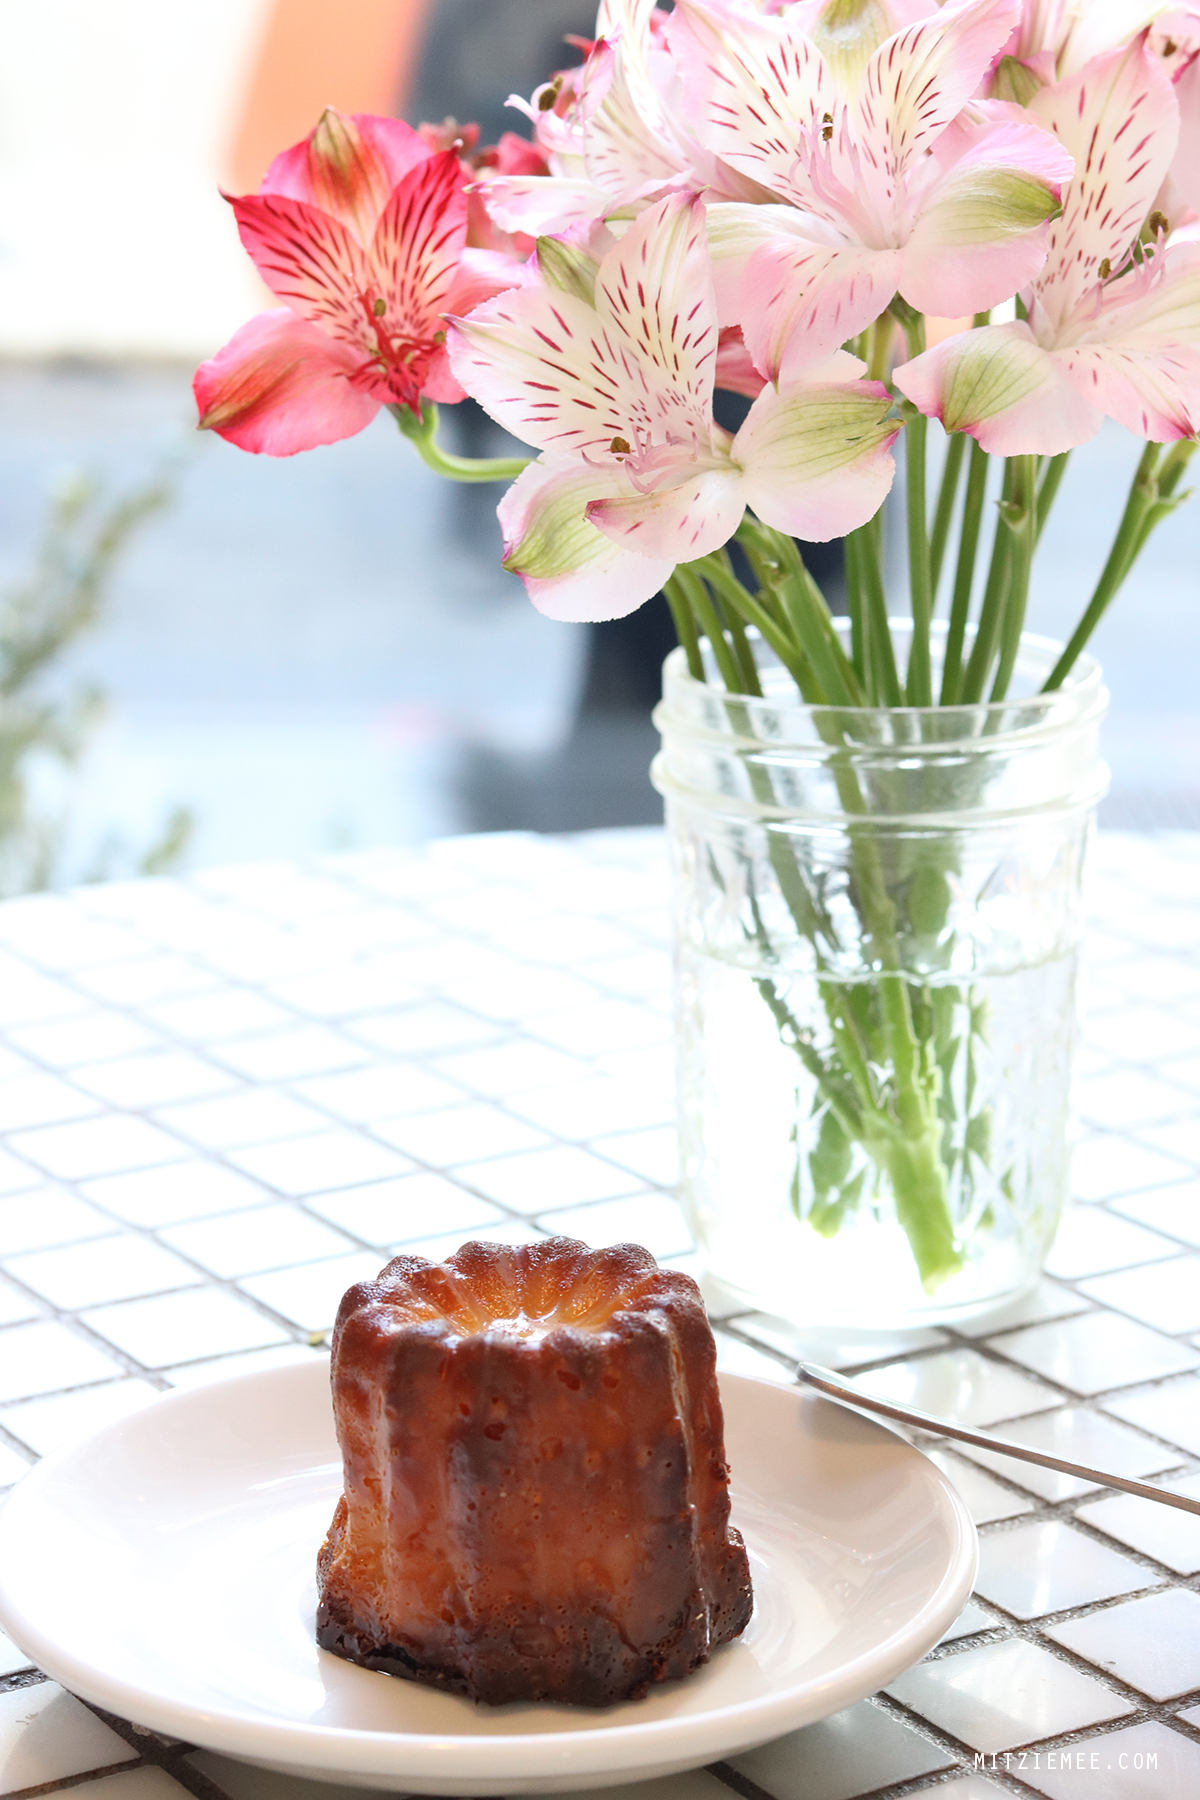 Canelé at Woops, New York